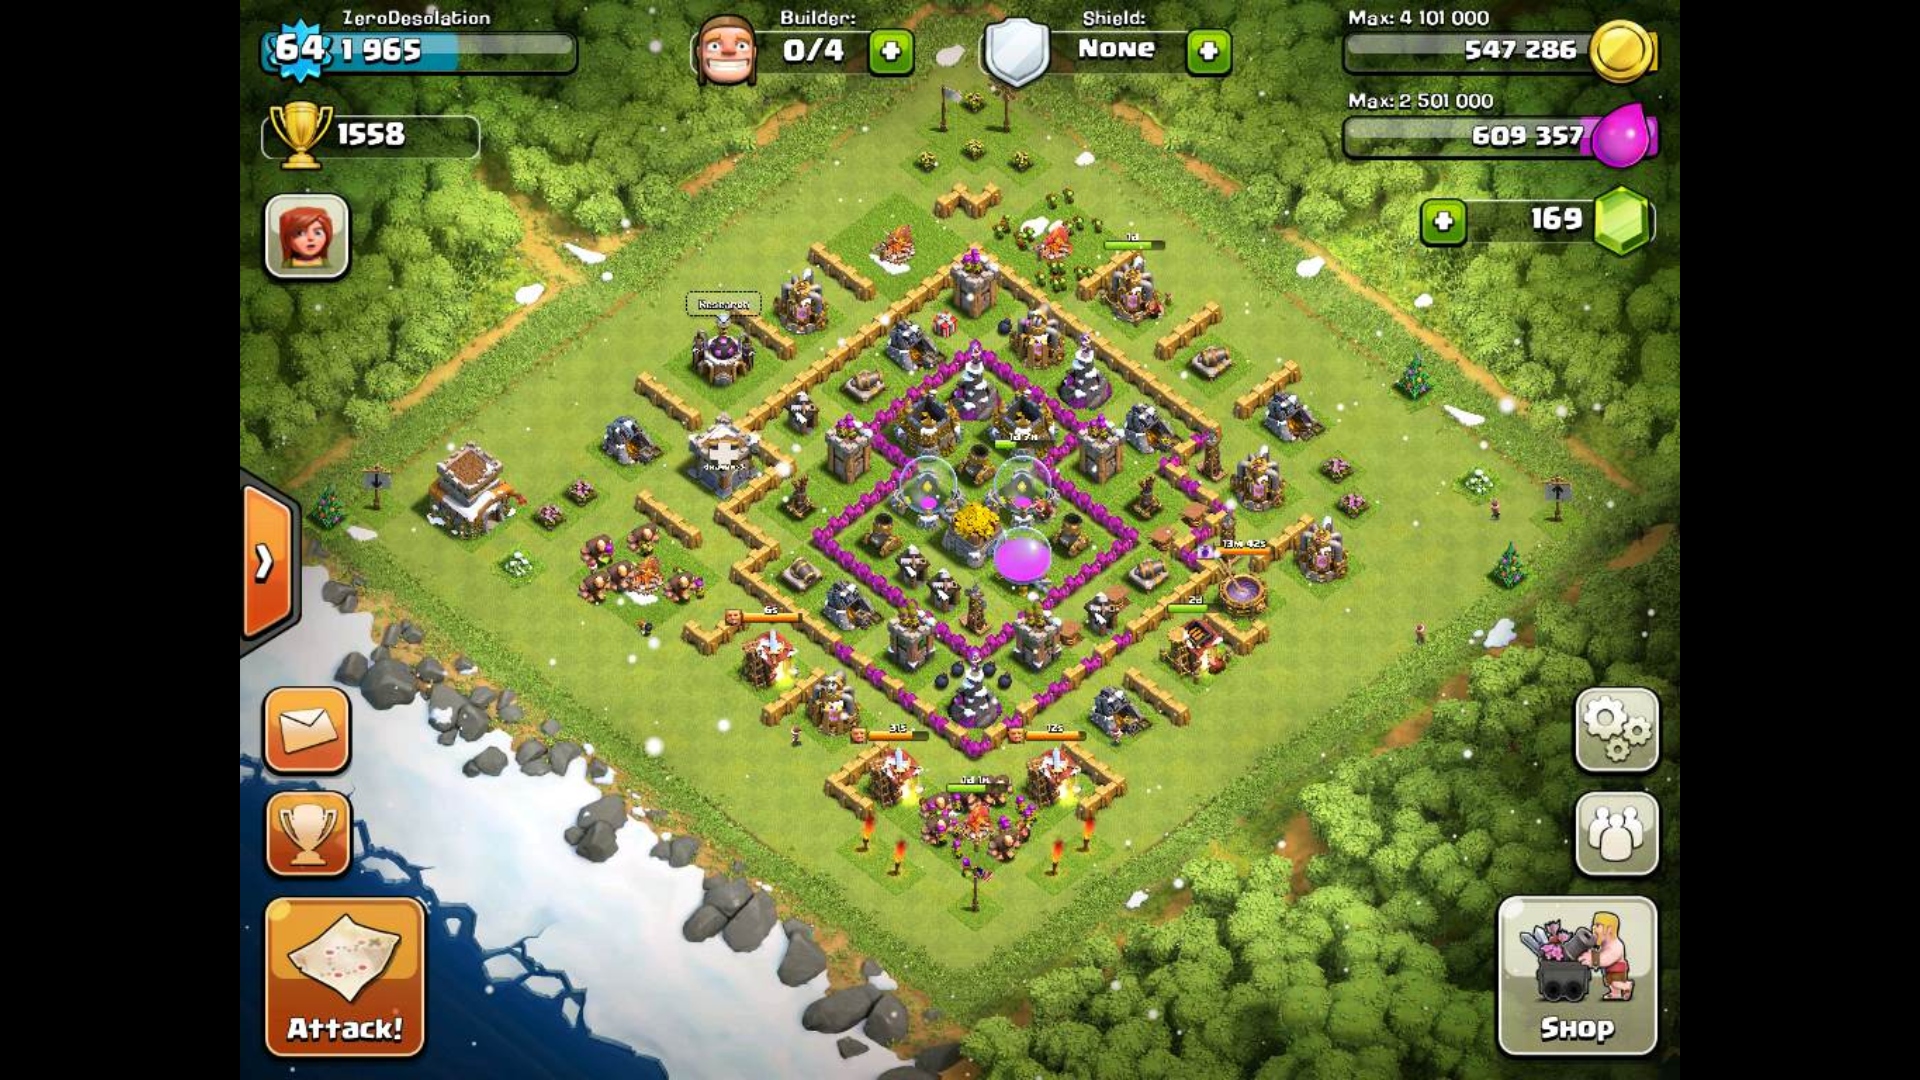 Addictive games - Clash of Clans, Image shows a large settlement in a field.